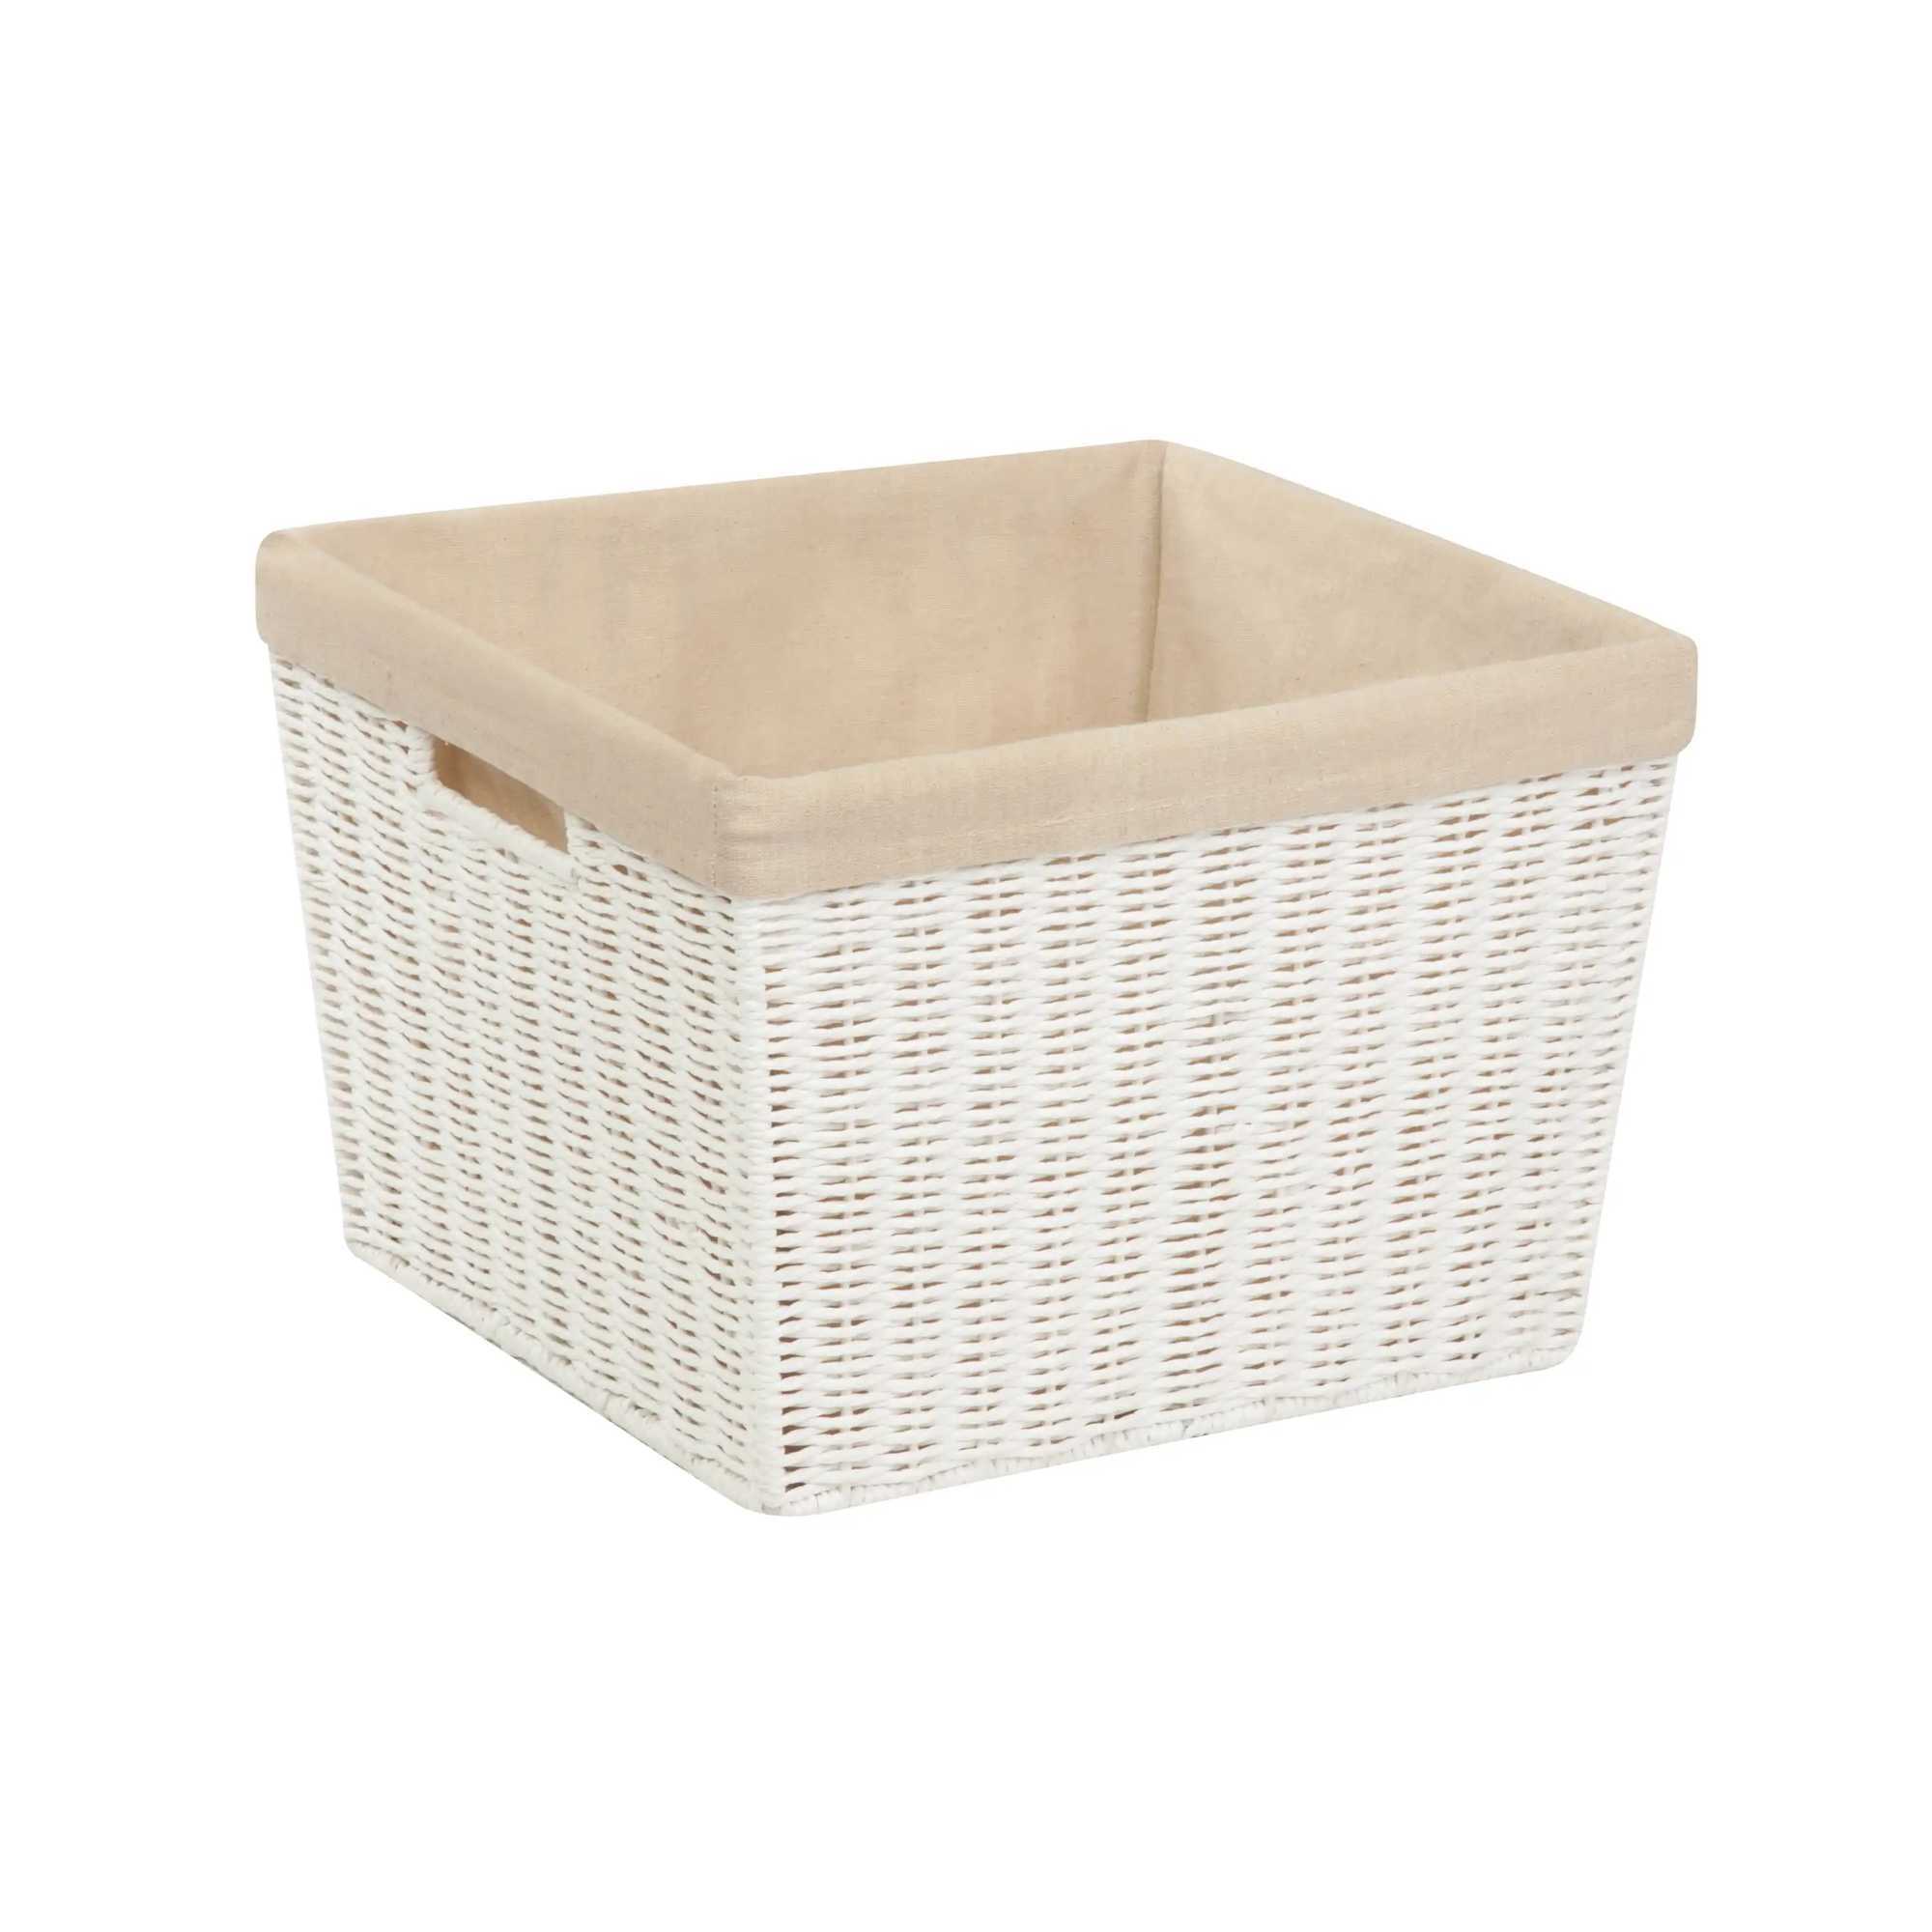 Storage Baskets Honey-Can-Do Paper Rope and Steel Large Storage Basket with Liner White/Natural